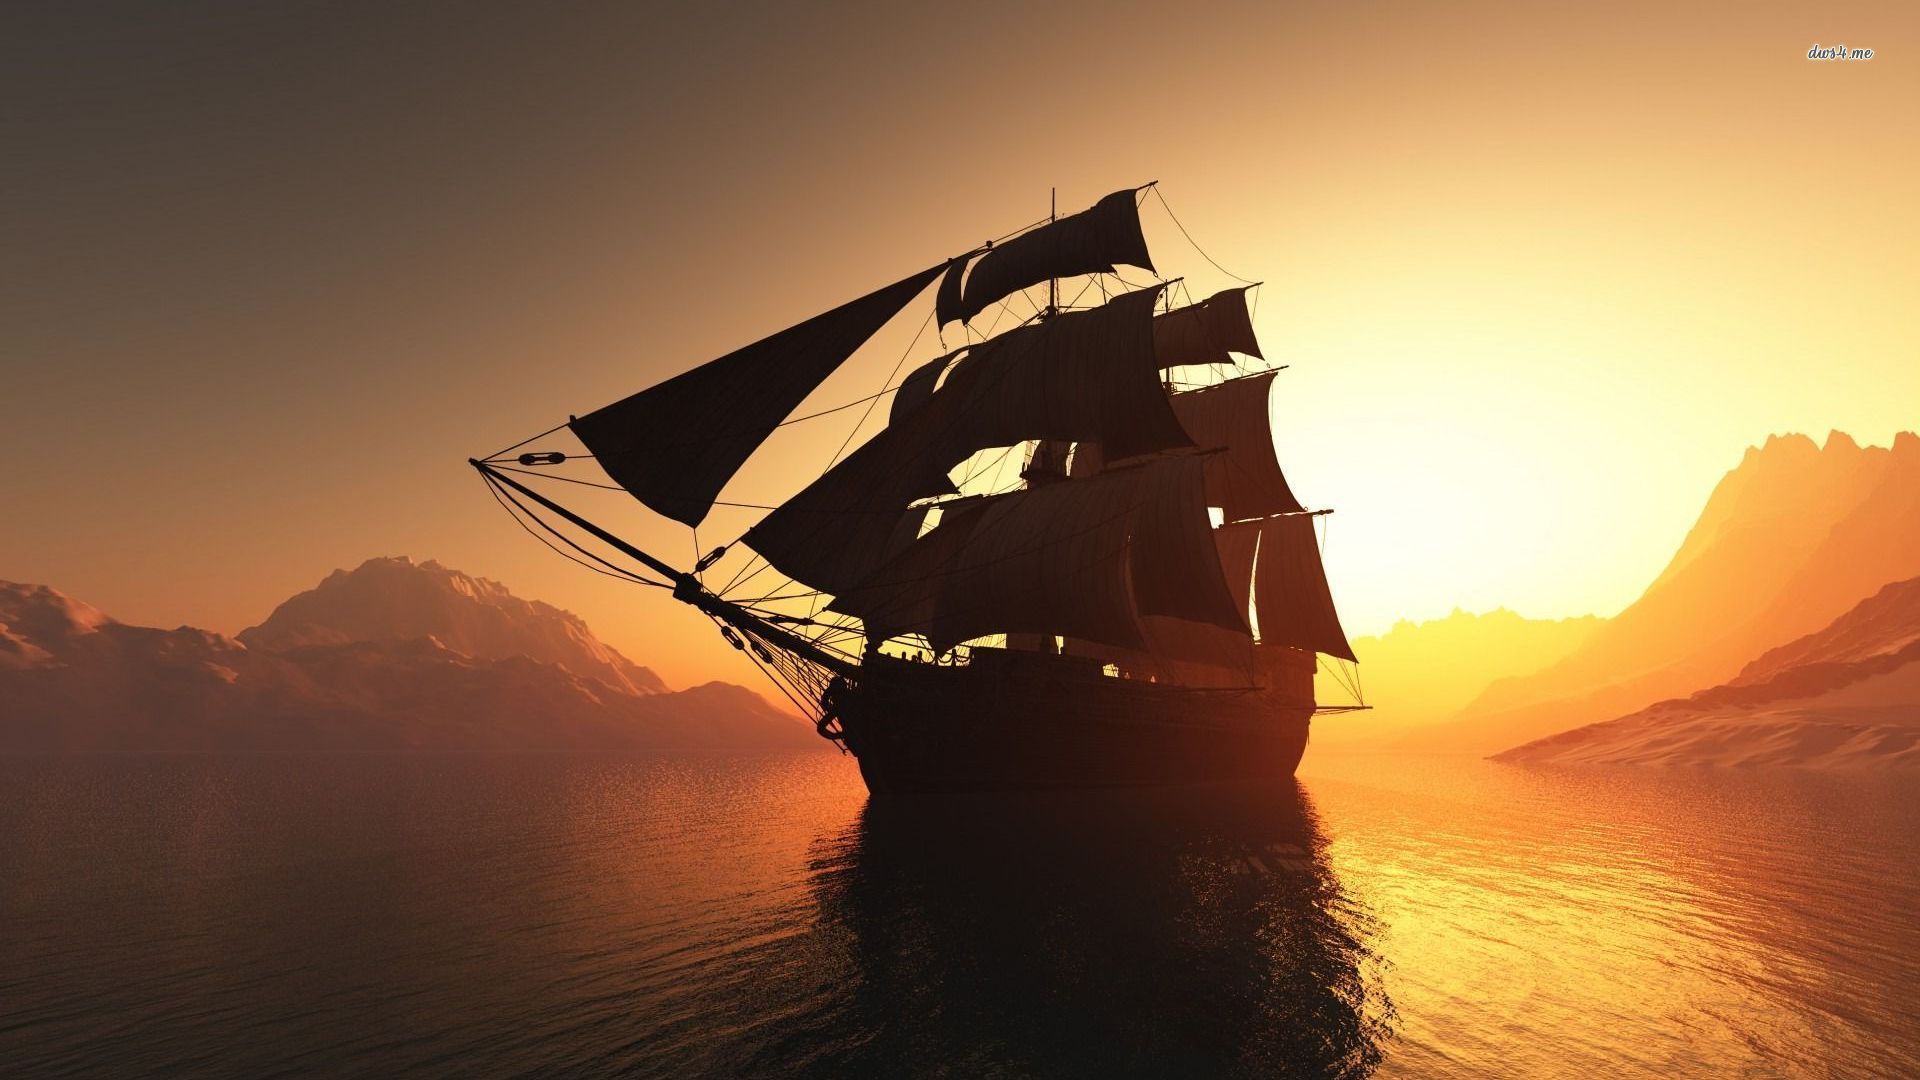 Ship silhouette at sunset wallpaper - Fantasy wallpapers - #26163